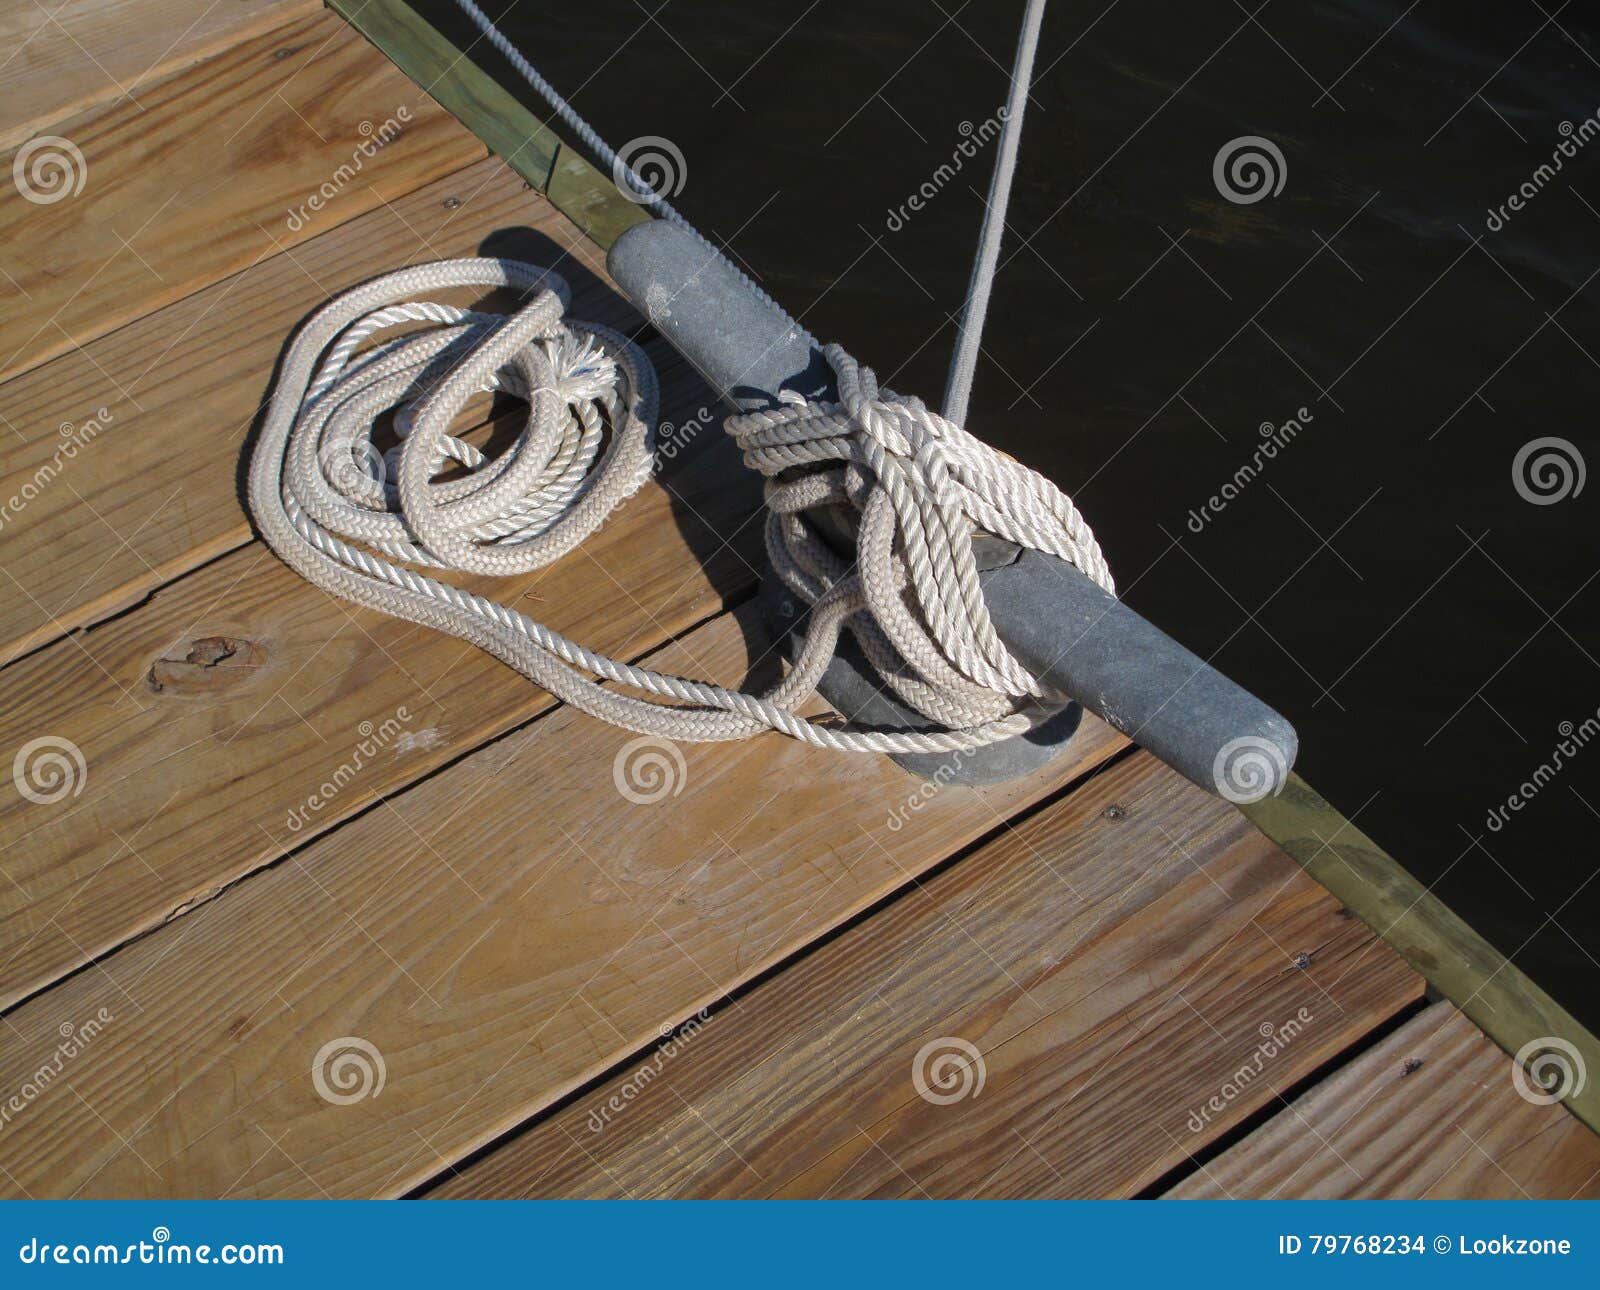 https://thumbs.dreamstime.com/z/boat-rope-tie-down-wrapped-around-dock-cleat-79768234.jpg